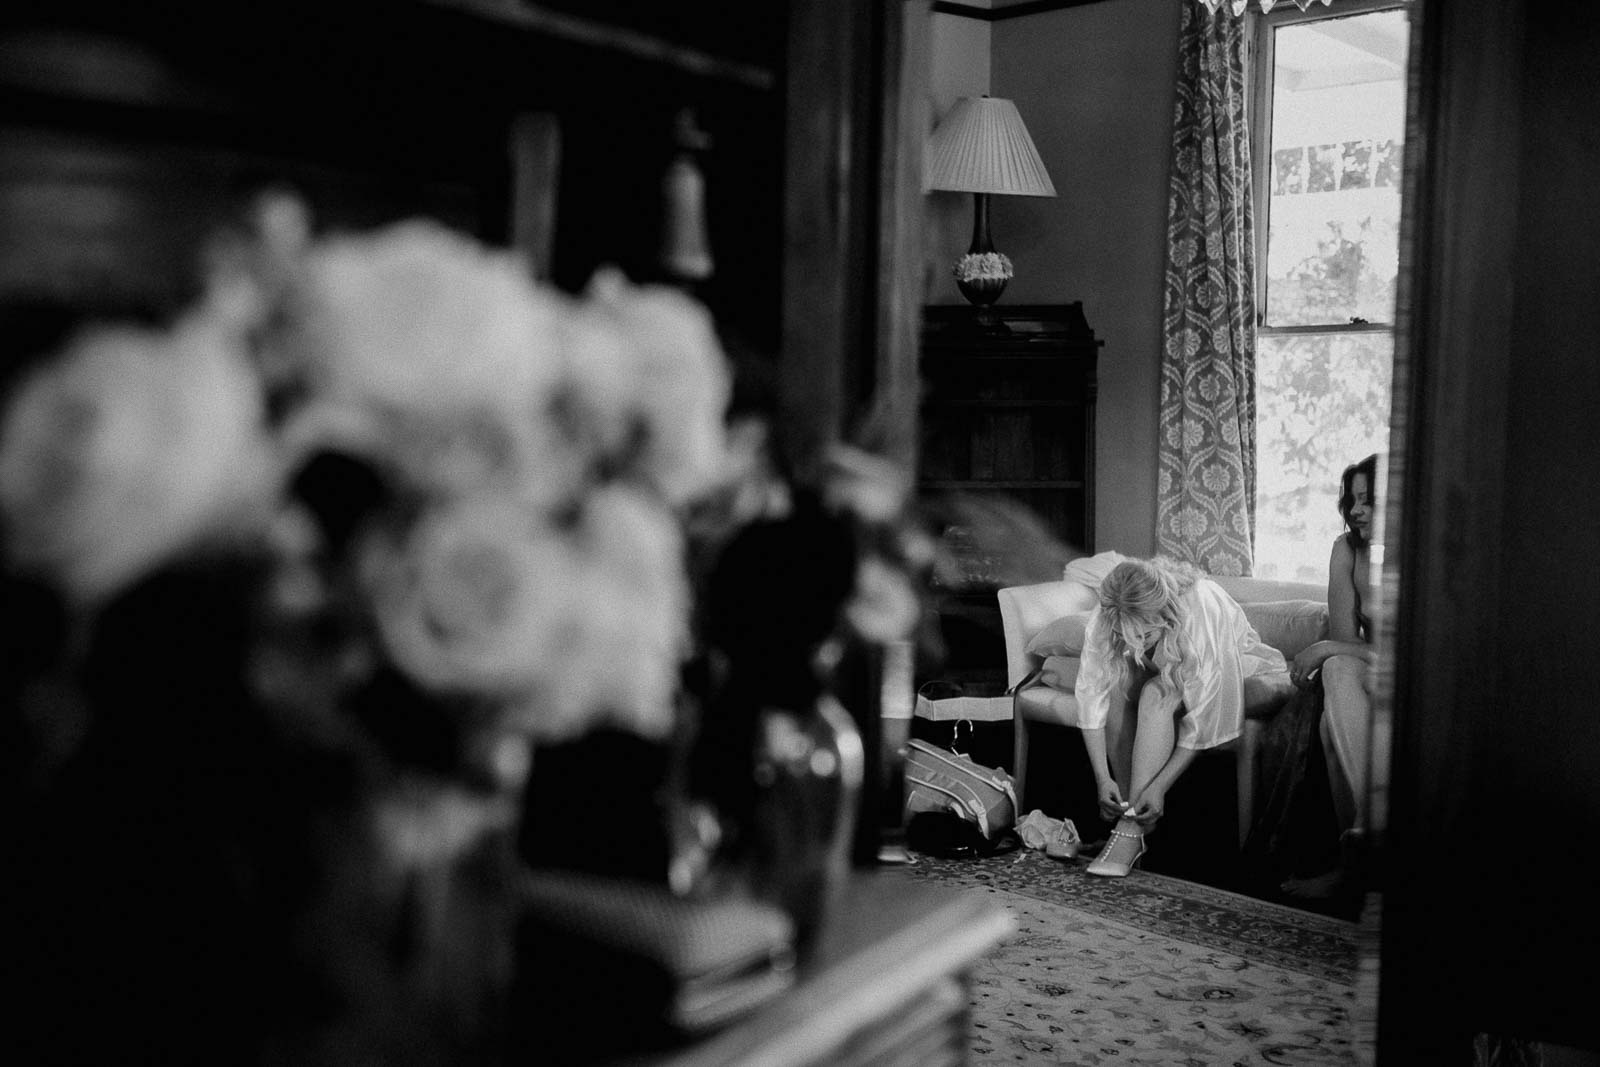 The bride ties her shoes on her wedding day at Barr Mansion